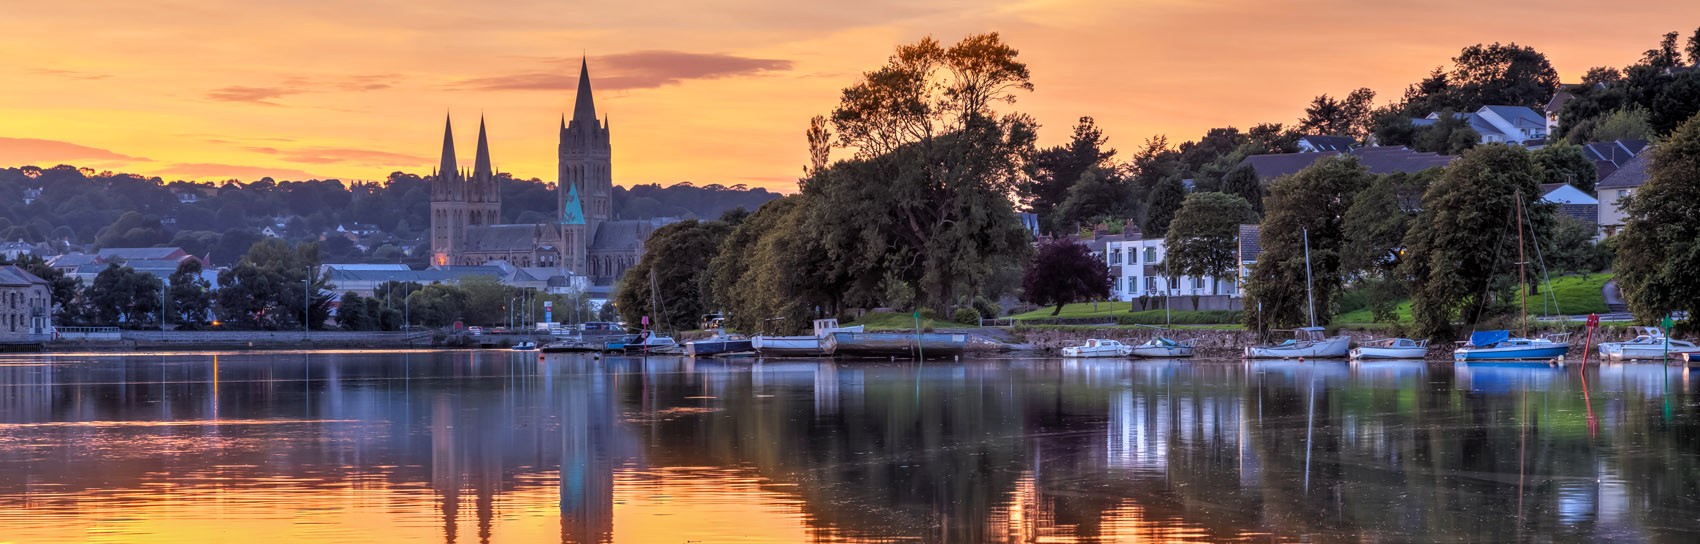 Looking up river to Truro Cathedral. Photograph by IAN WOOLCOCK